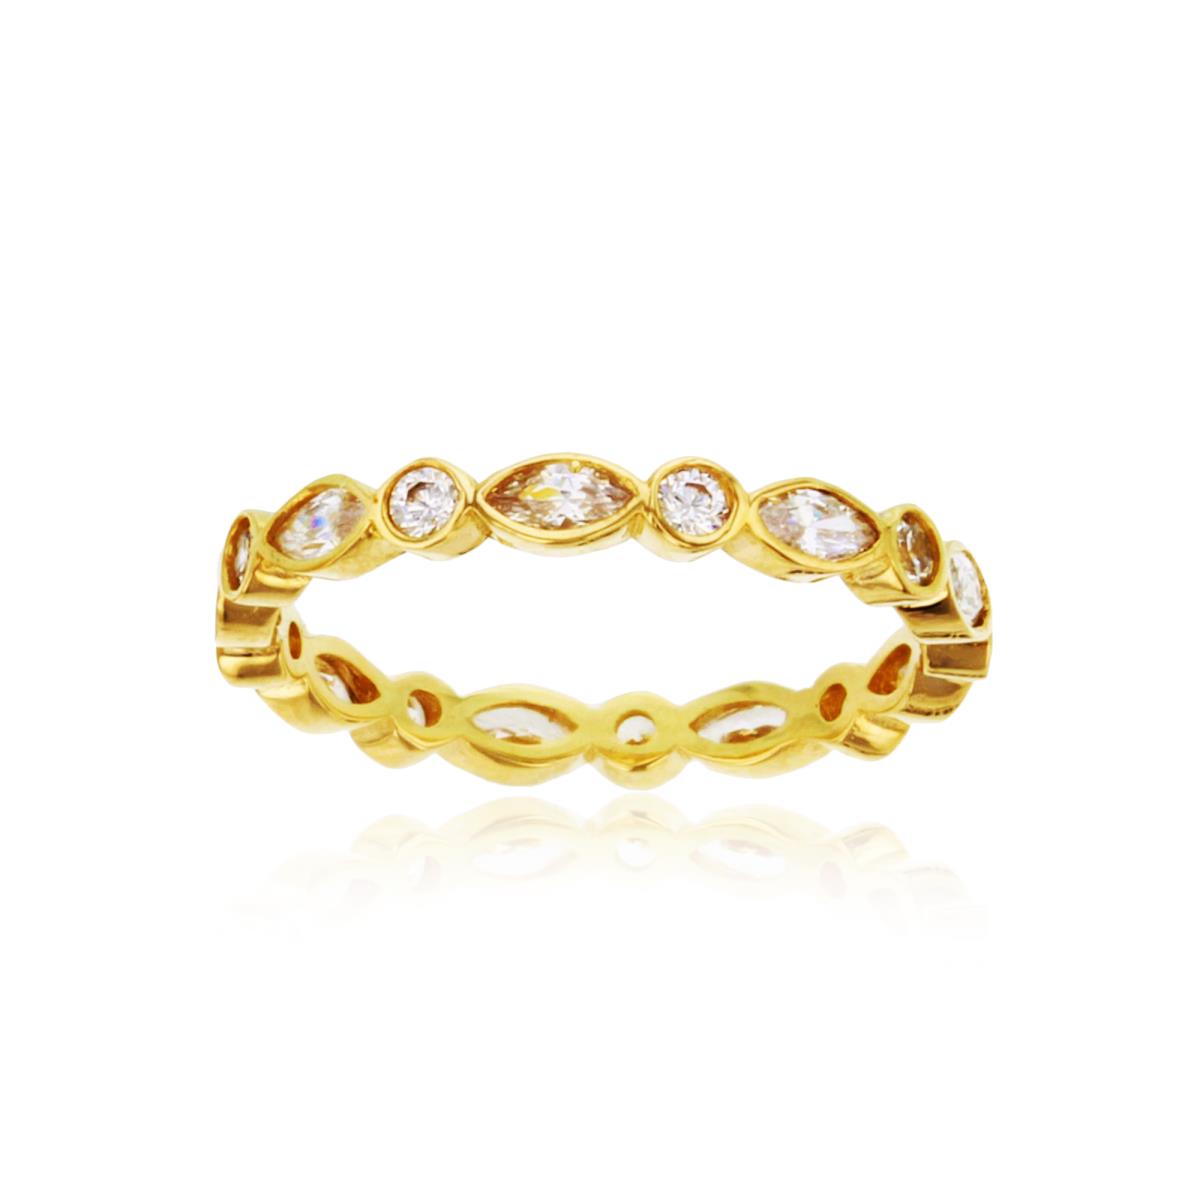 10K Yellow Gold 3.7mm Alternating Round & Marquise CZ Eternity Ring